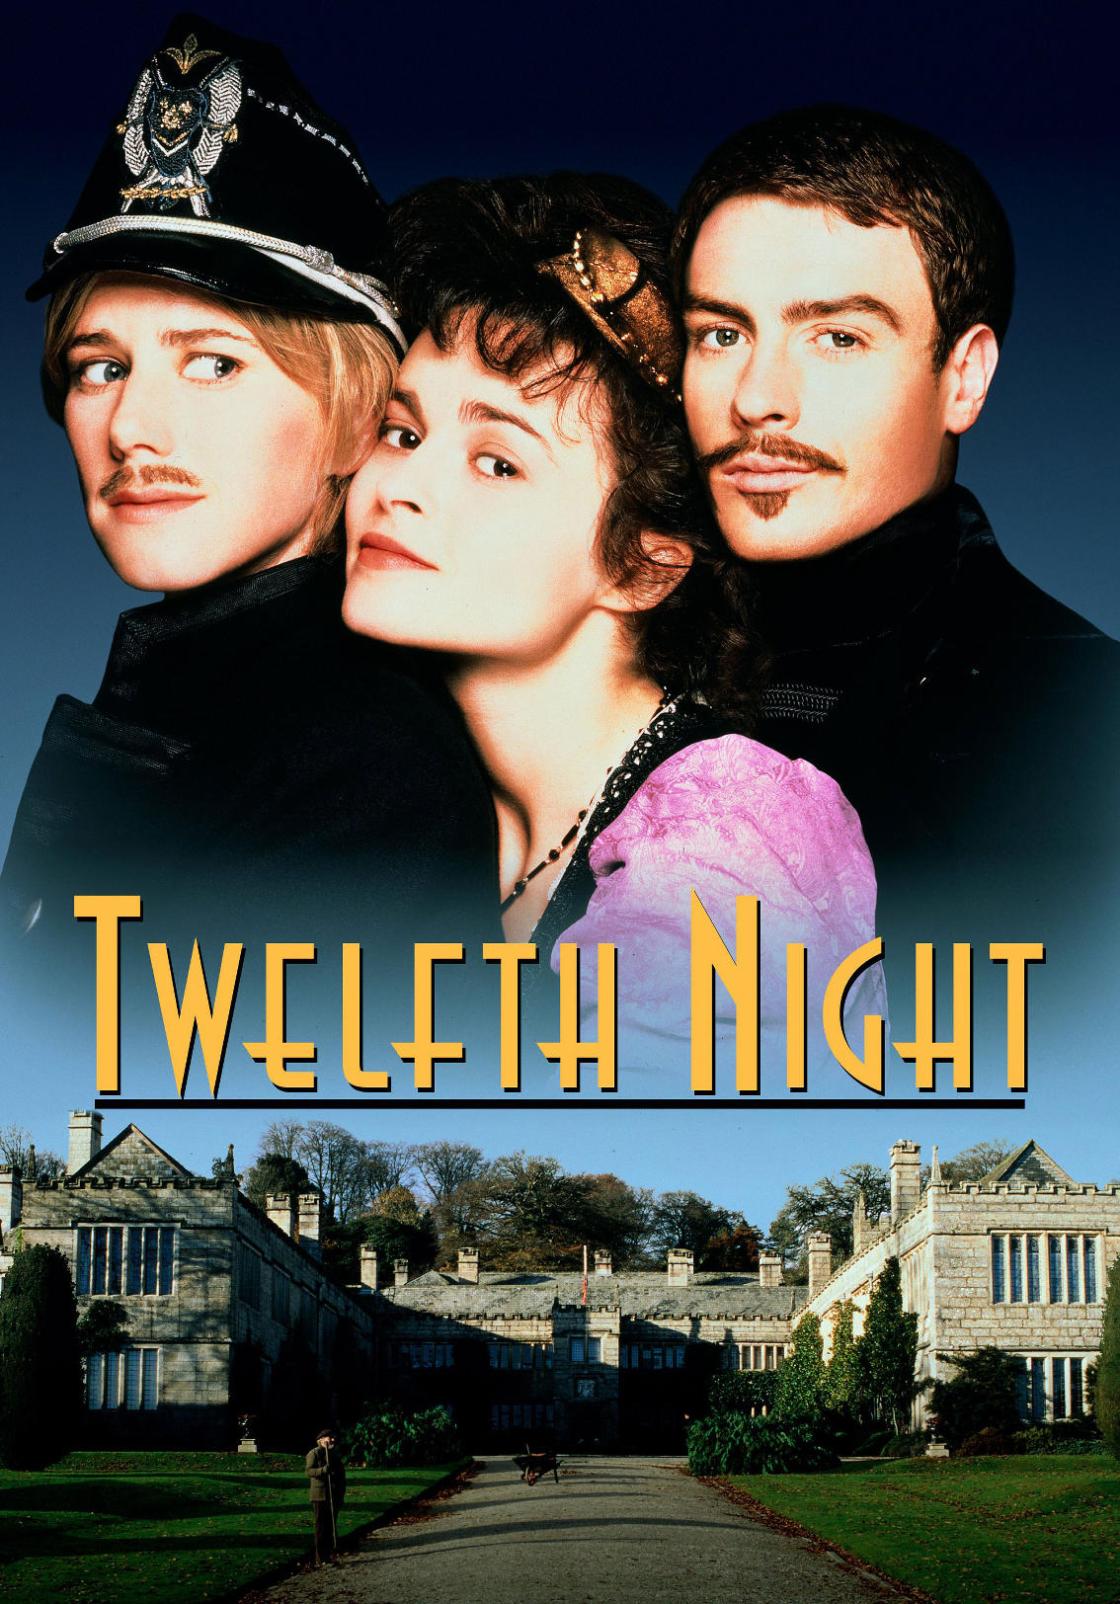 What Are The Different Interpretations Of Twelfth Night And How Have They Changed Over Time?